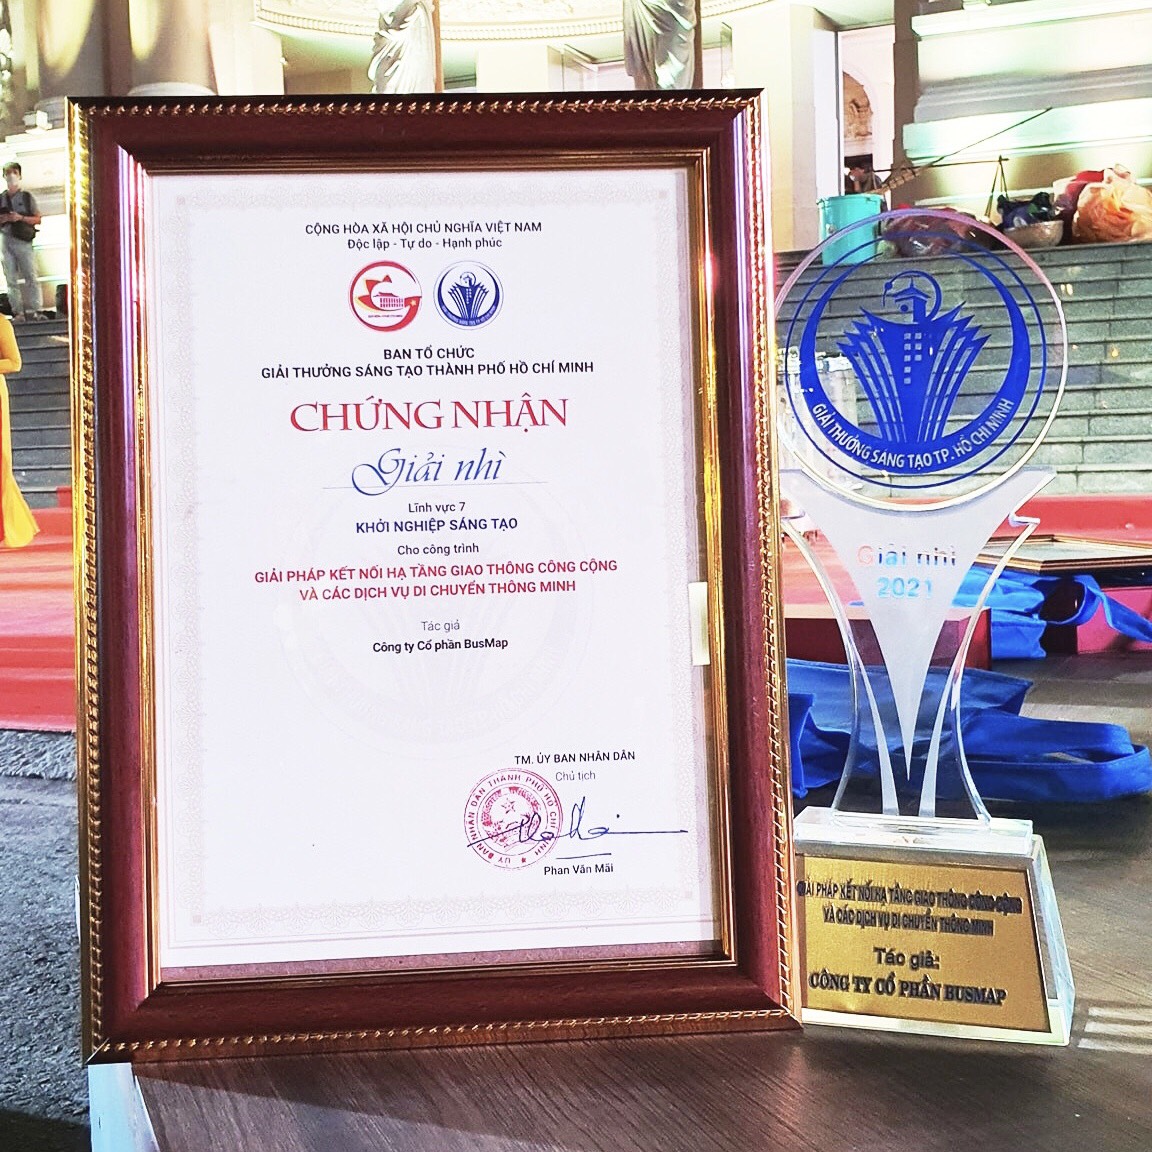 BusMap was honored at the HoChiMinh City Creative Awards